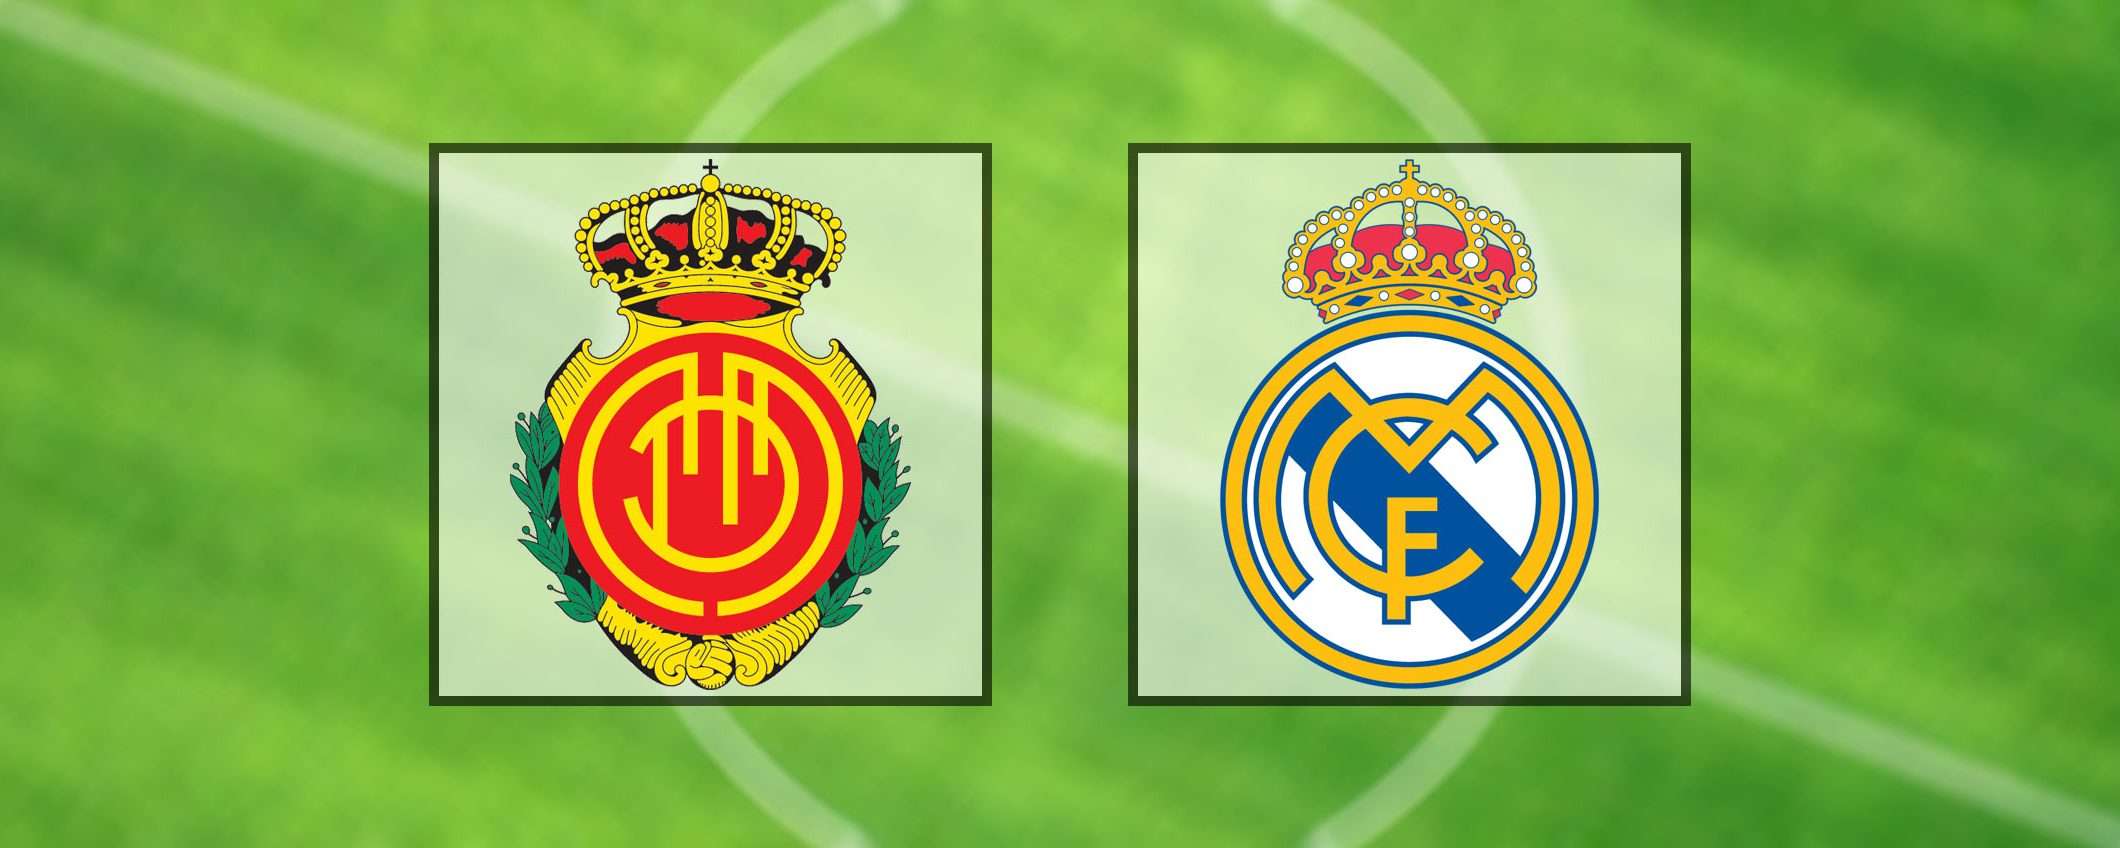 Come vedere Maiorca-Real Madrid in streaming